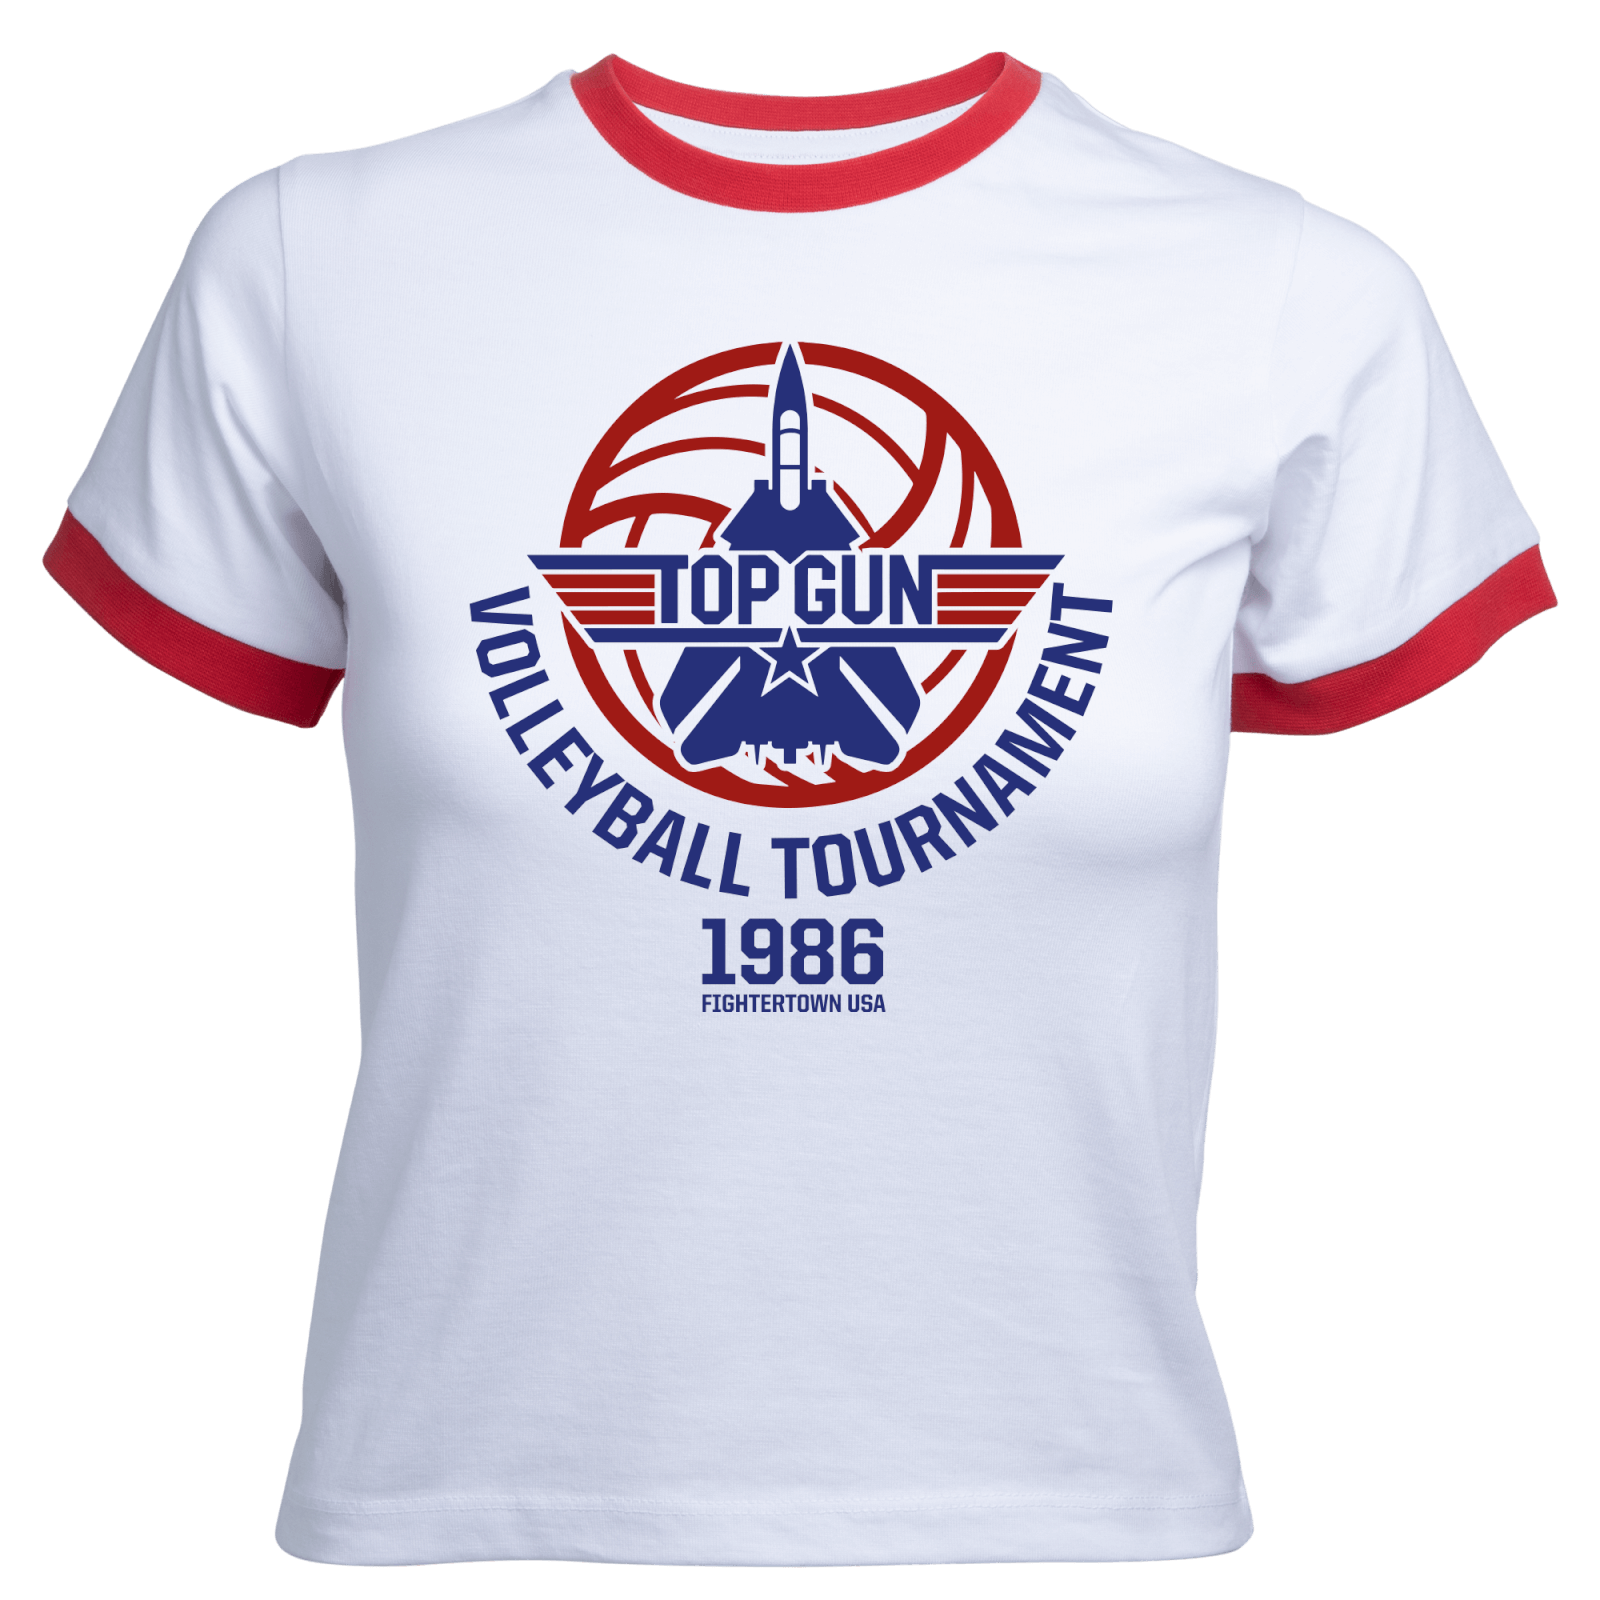 Top Gun Volleyball Tournament Women's Cropped Ringer T-Shirt - White Red - XS - White Red